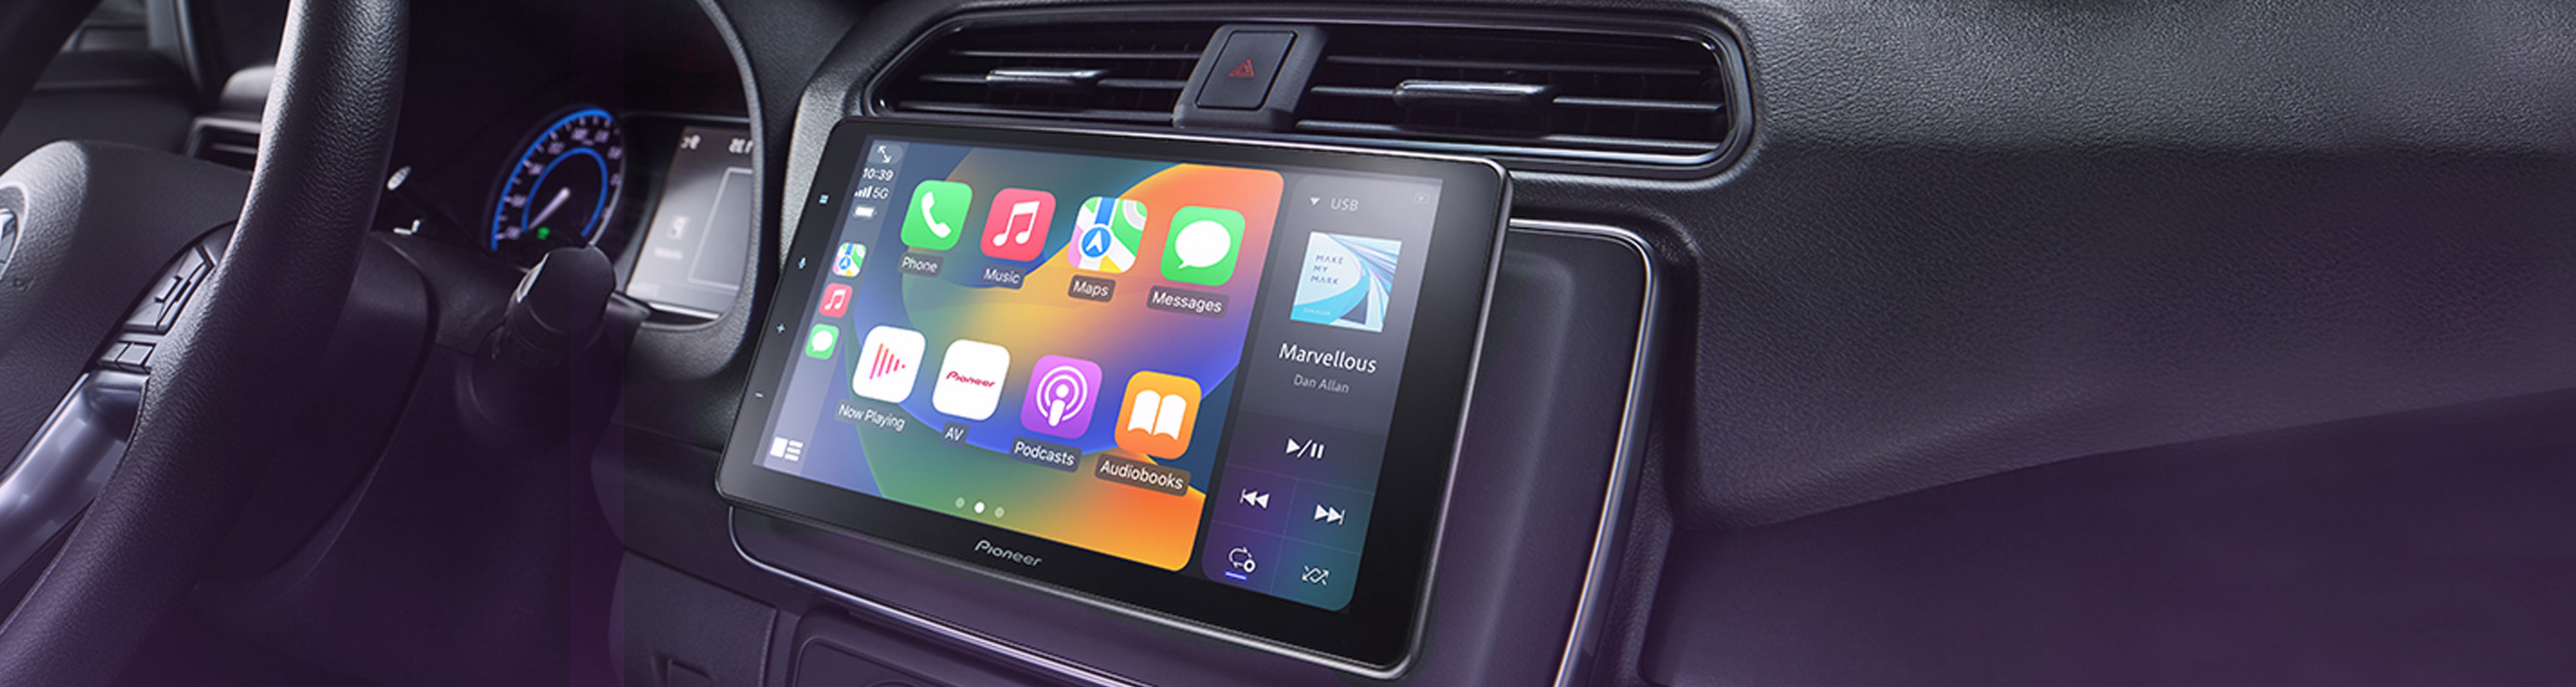 Pioneer releases Apple CarPlay for US and Europe vehicle dashboards